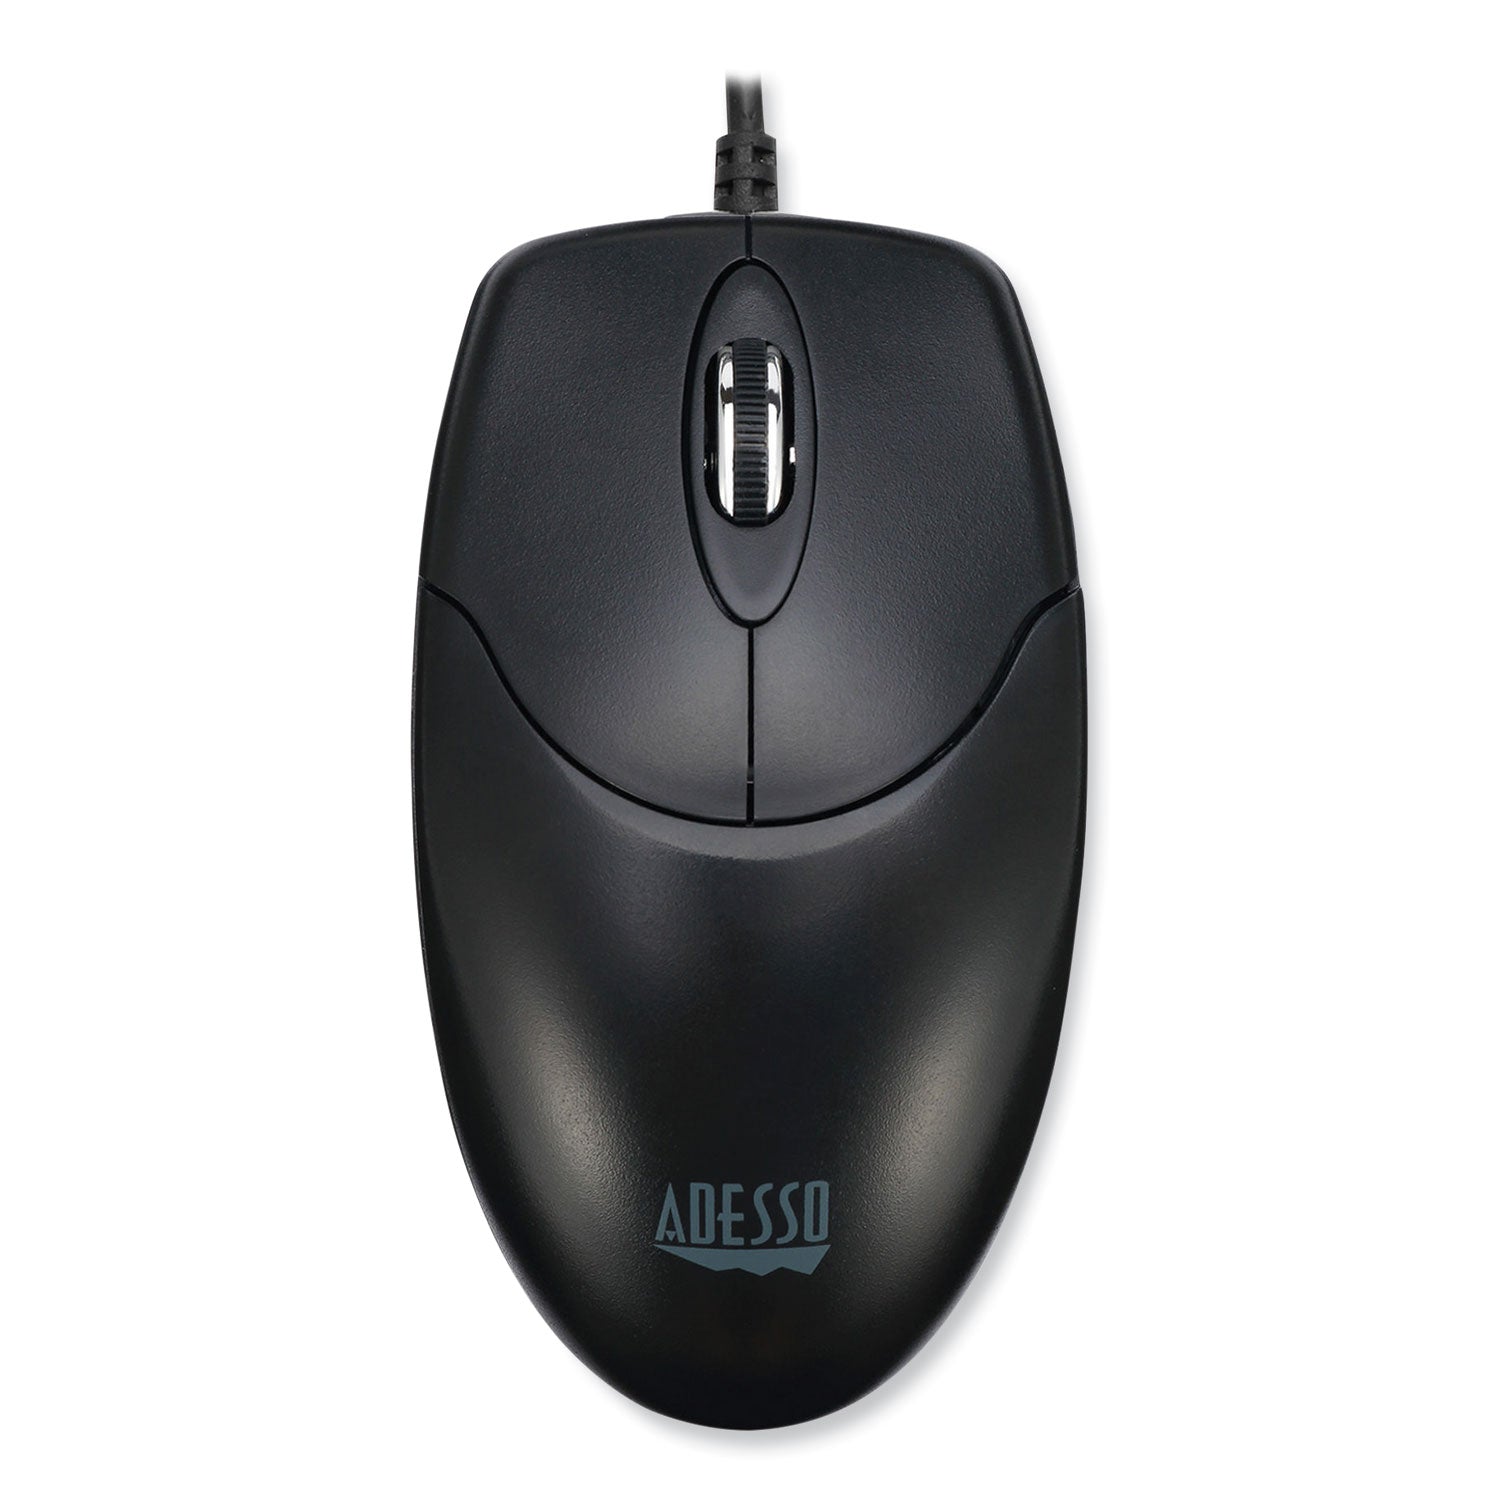 imouse-desktop-full-sized-mouse-usb-left-right-hand-use-black_adeimousem6taa - 1